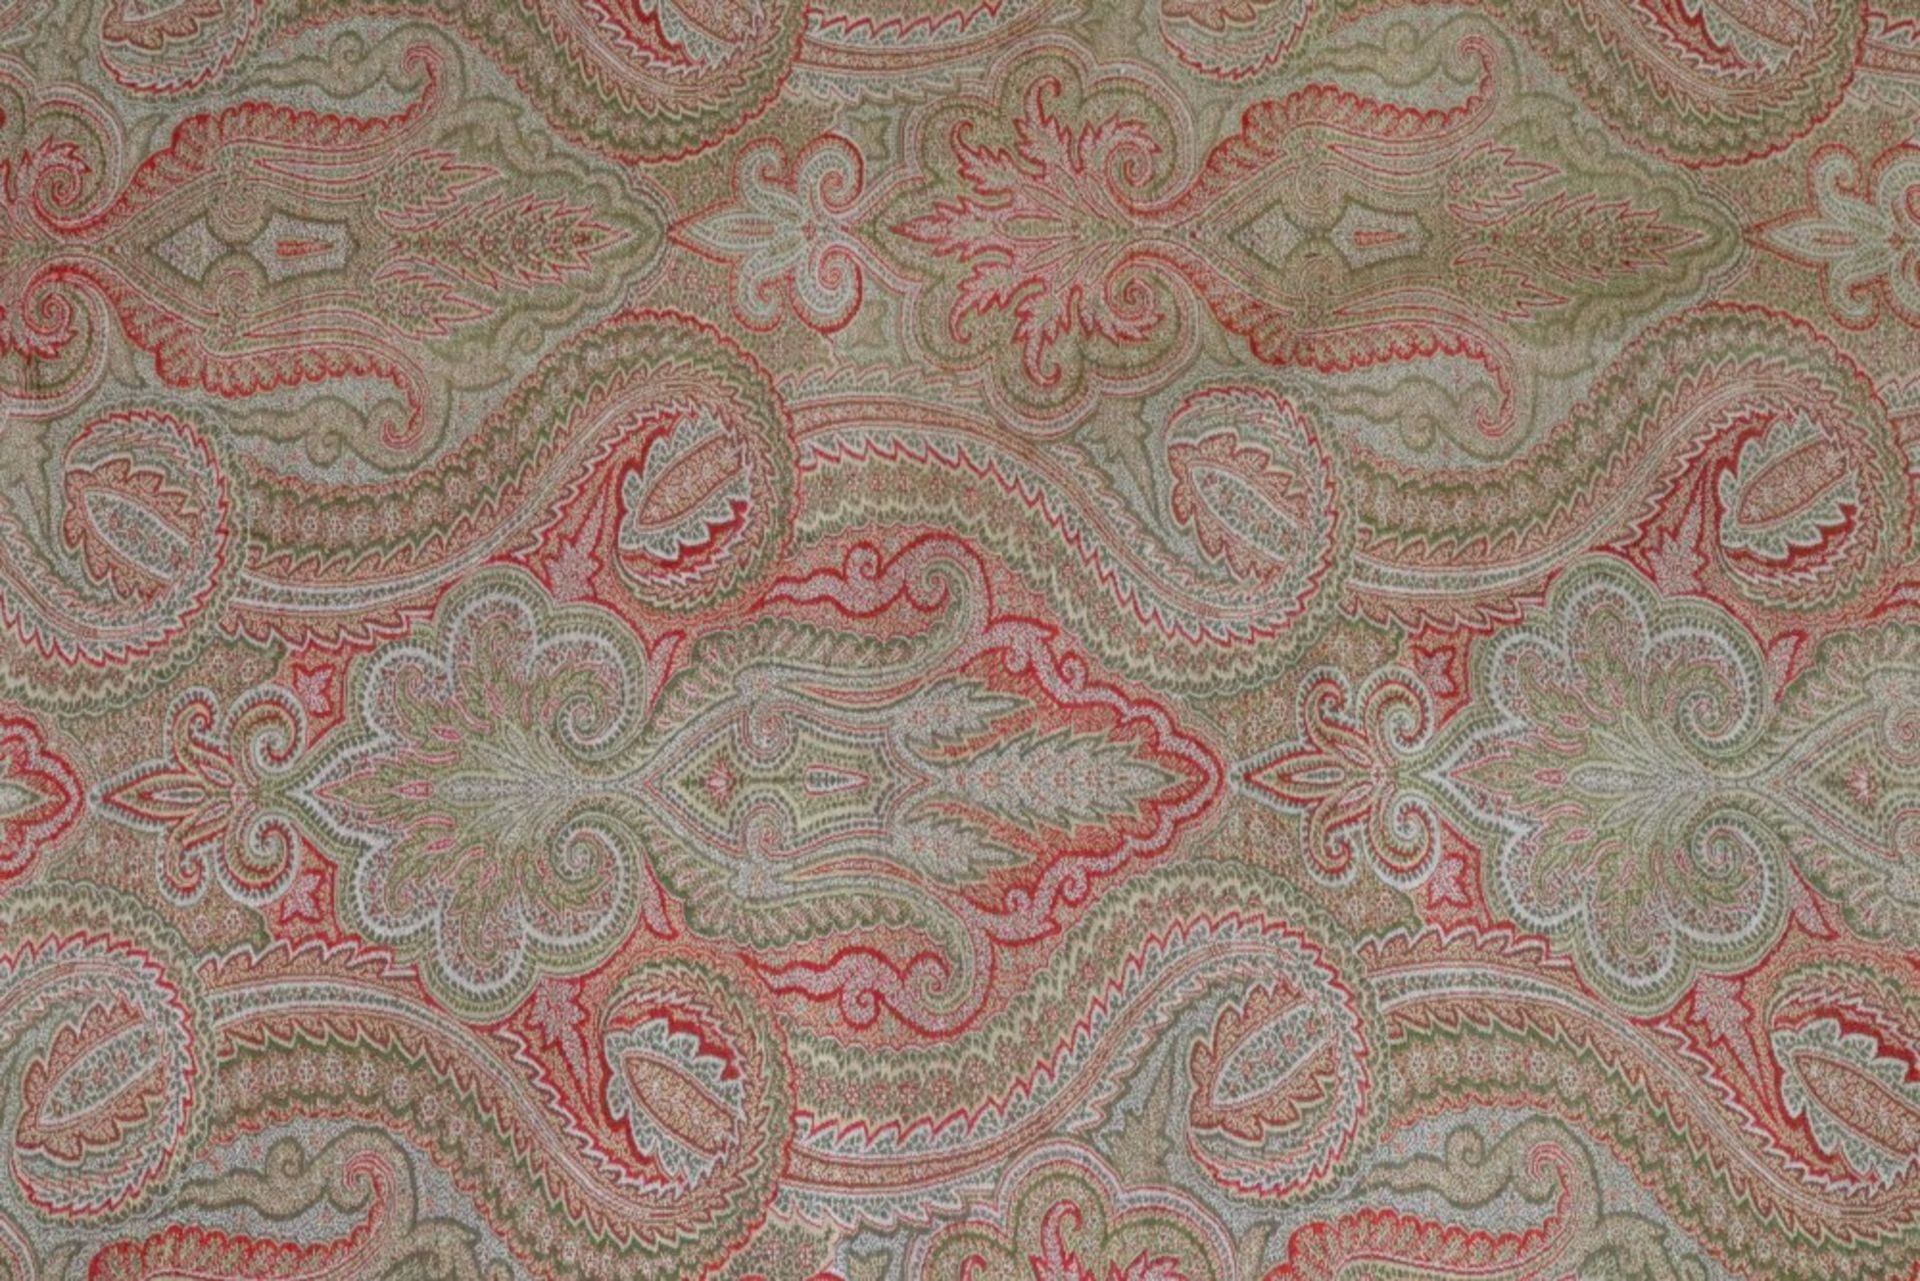 A paisley shawl, late 19th/early 20th century, typically patterned, 175 x 175cm. - Image 2 of 3